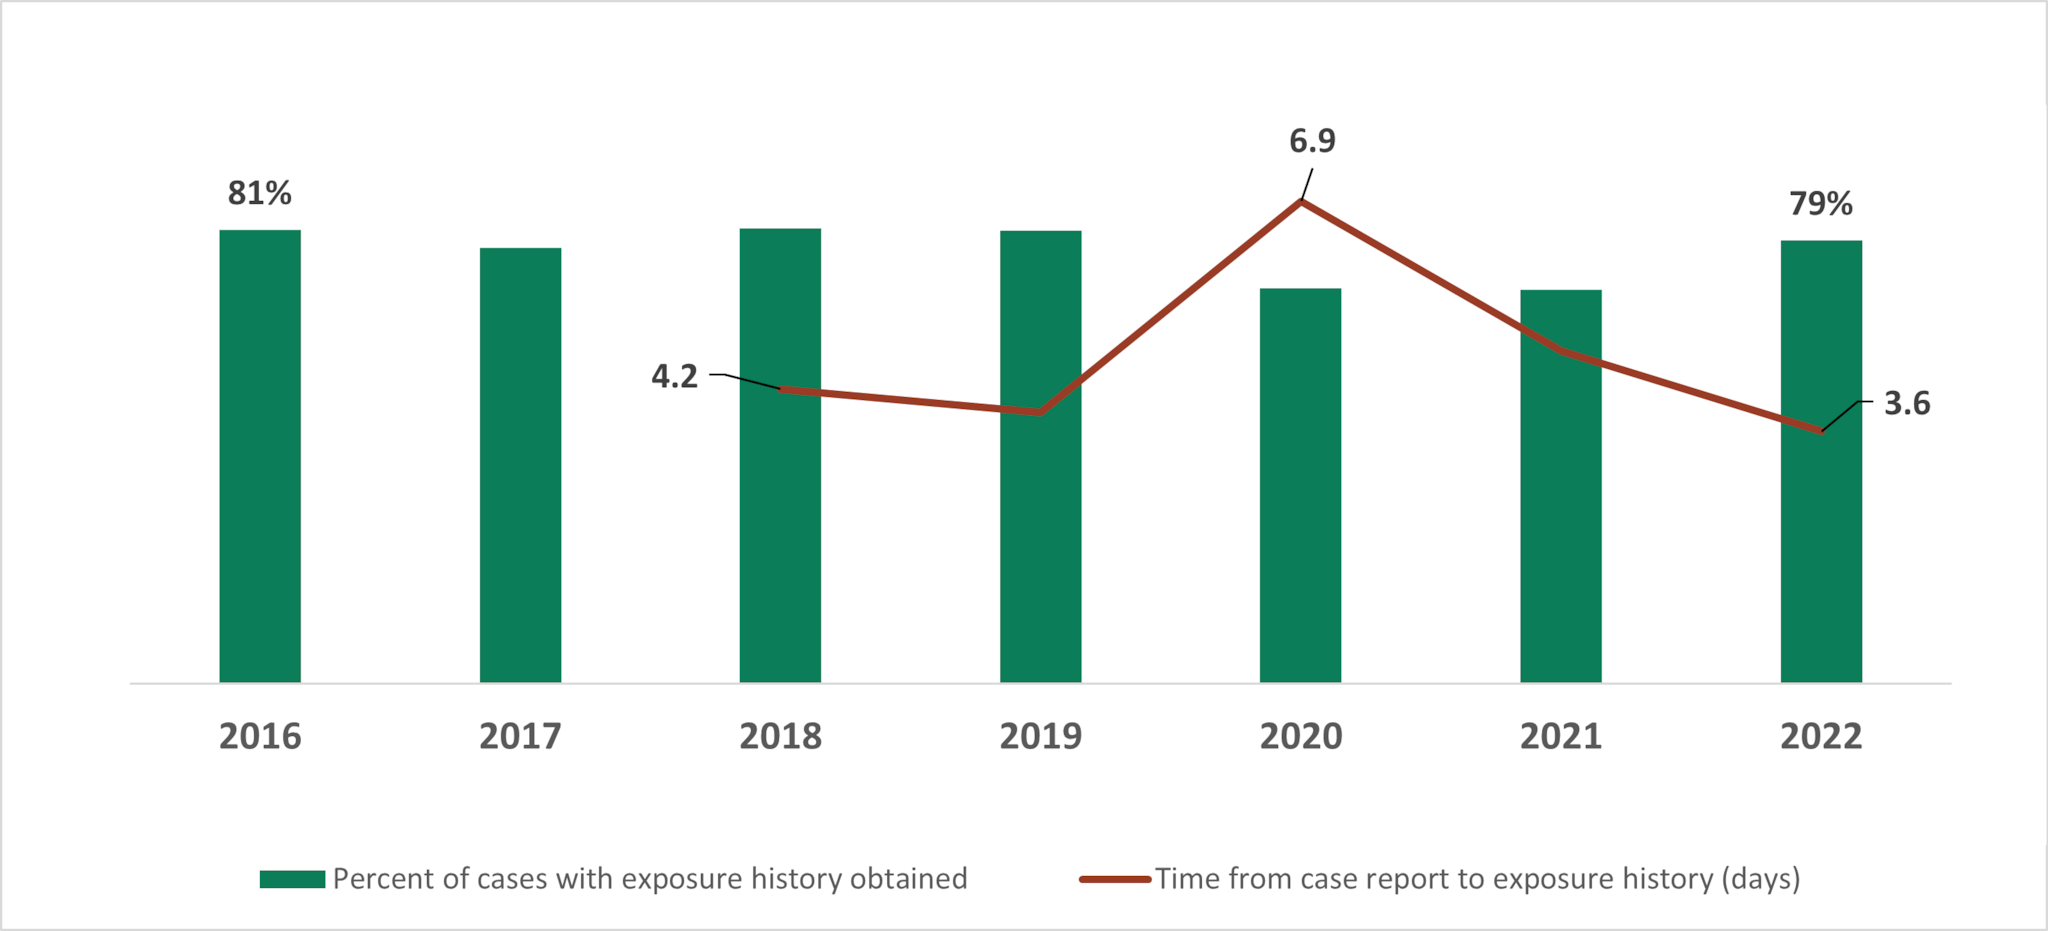 From 2016 to 2022, OBNE sites maintained the percent of cases with exposure history obtained. Additionally, sites documented a return to pre-COVID turnaround times for obtaining an exposure history, from 6.9 days in 2020 to 3.6 days in 2022.